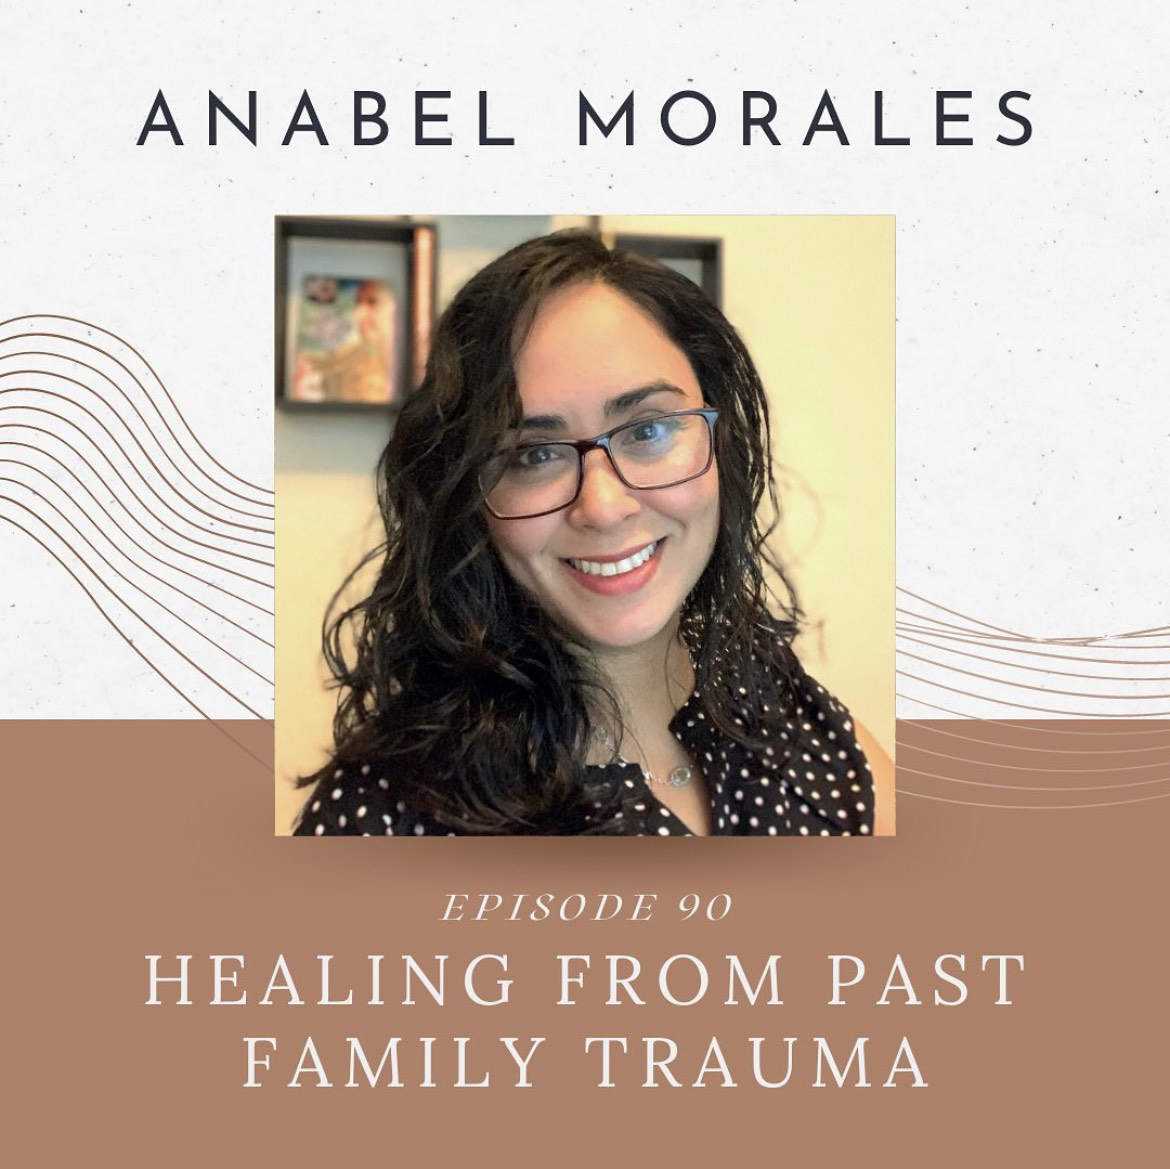 Episode 90: Healing from Past Family Trauma with Anabel Morales